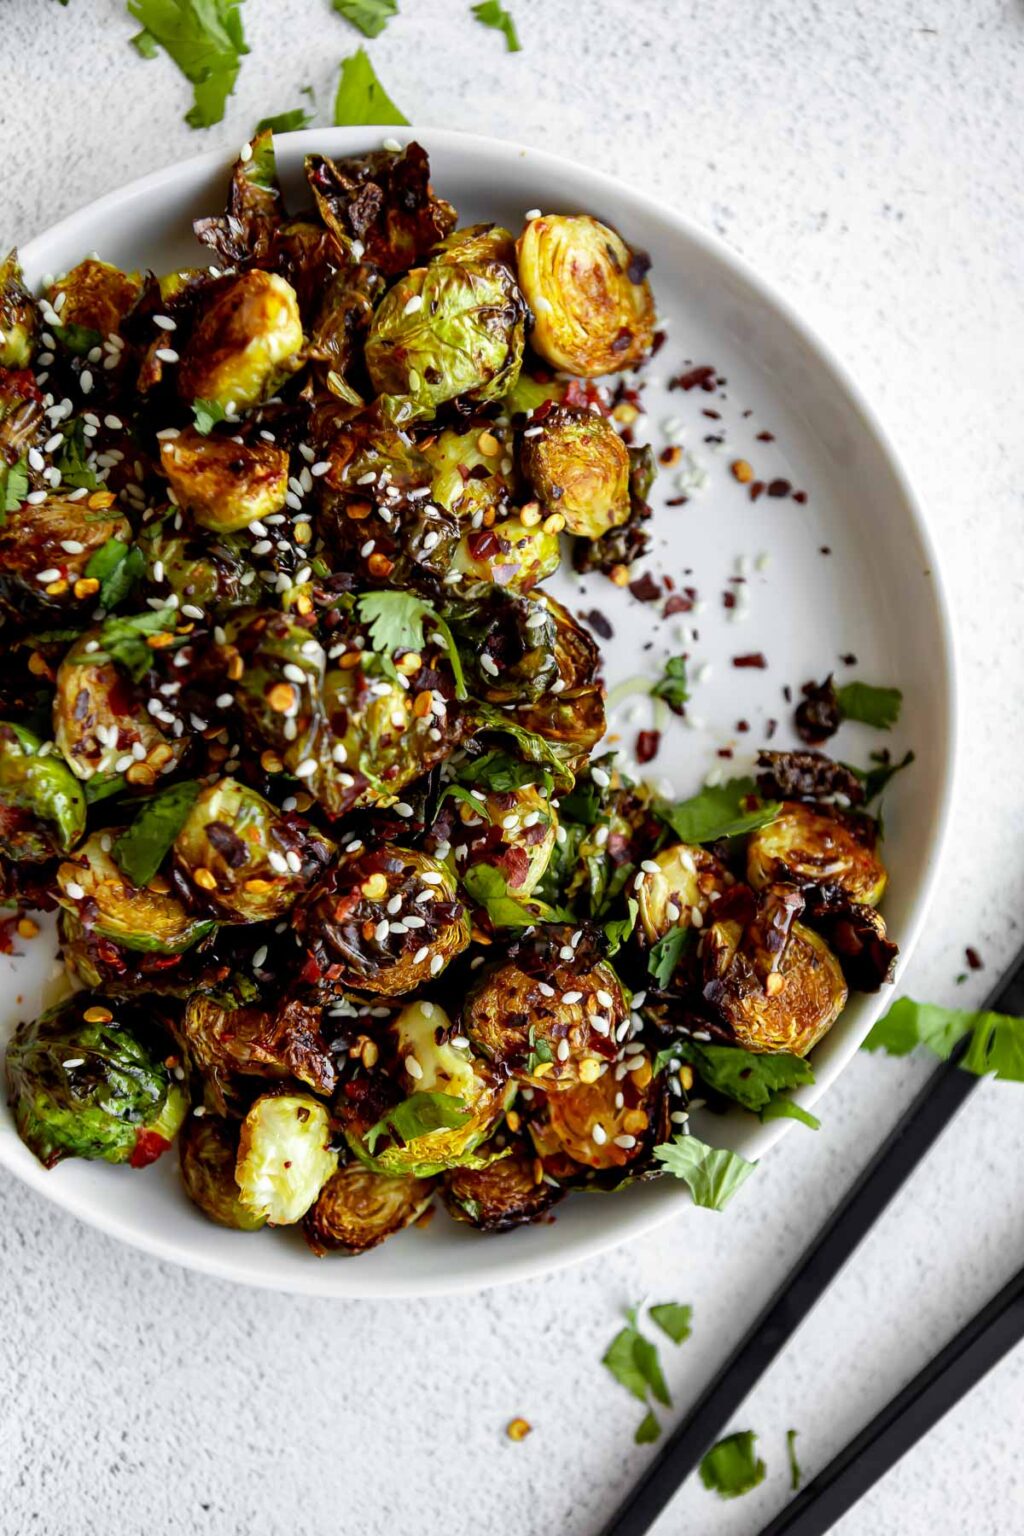 Chili Garlic Air Fryer Brussels Sprouts - Eat With Clarity